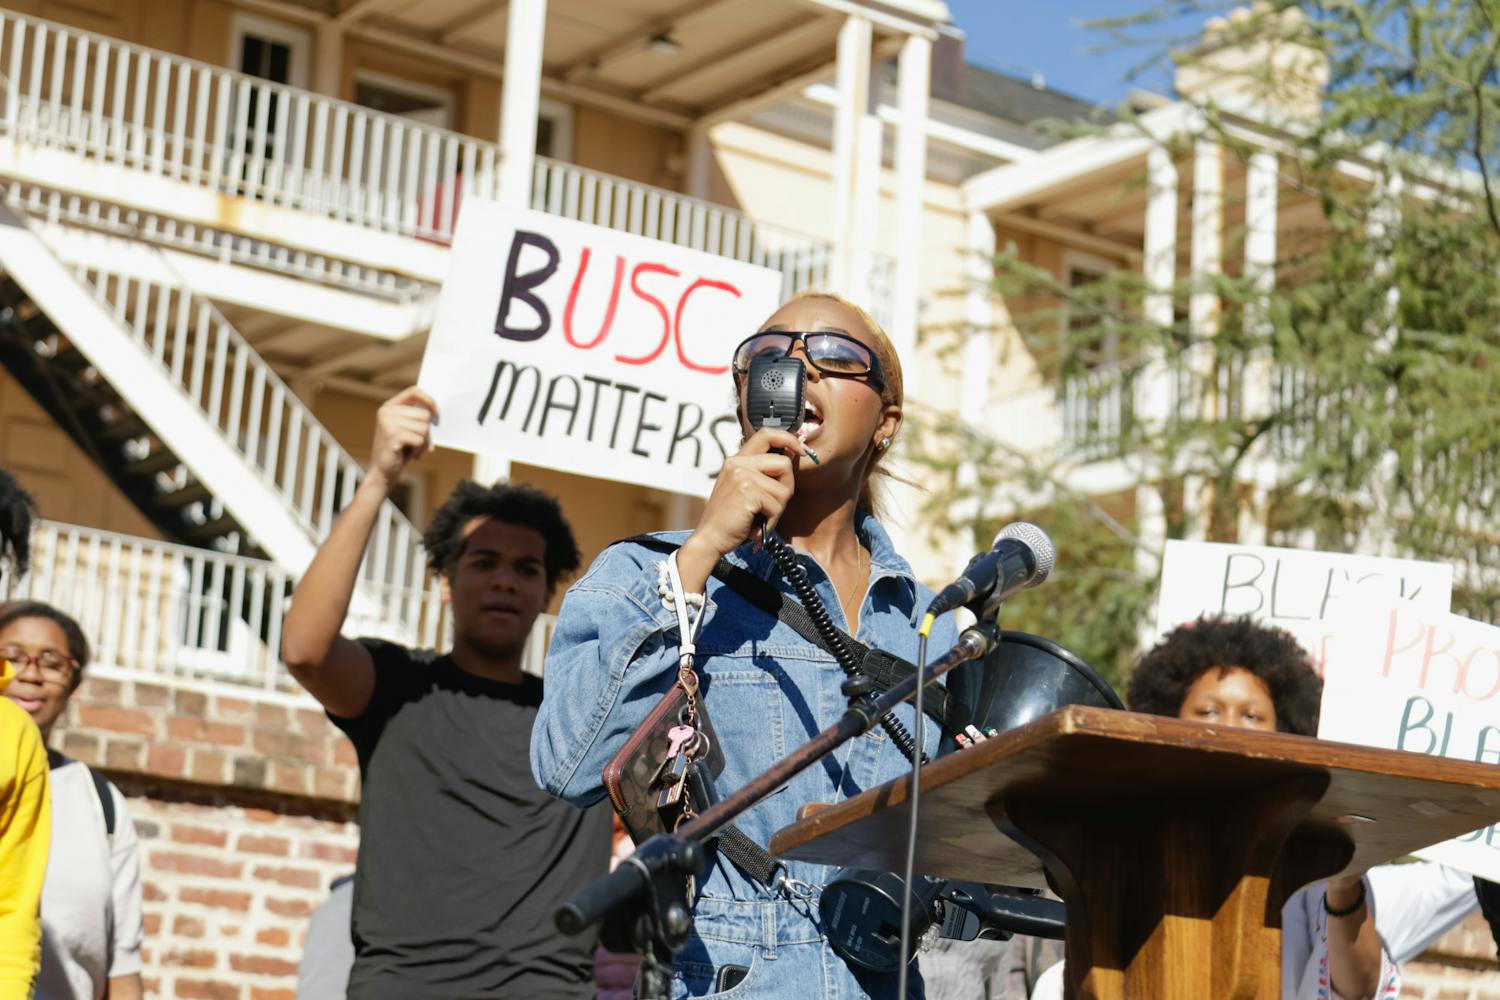 Students gathered for a protest against "racist culture" at 鶹С򽴫ý on Jan. 20, 2023. The protest began at the McKissick Museum on the Horseshoe and ended on Greene Street with students rallying outside Russell House Student Union to share their experiences. Courtney McClain, a fourth-year broadcast journalism student and activist, organized the protest after a TikTok video of an individual claiming to be a 鶹С򽴫ý student and repeatedly saying an anti-Black racial slur went viral last week. The university has confirmed that said individual is not a 鶹С򽴫ý student.&nbsp;